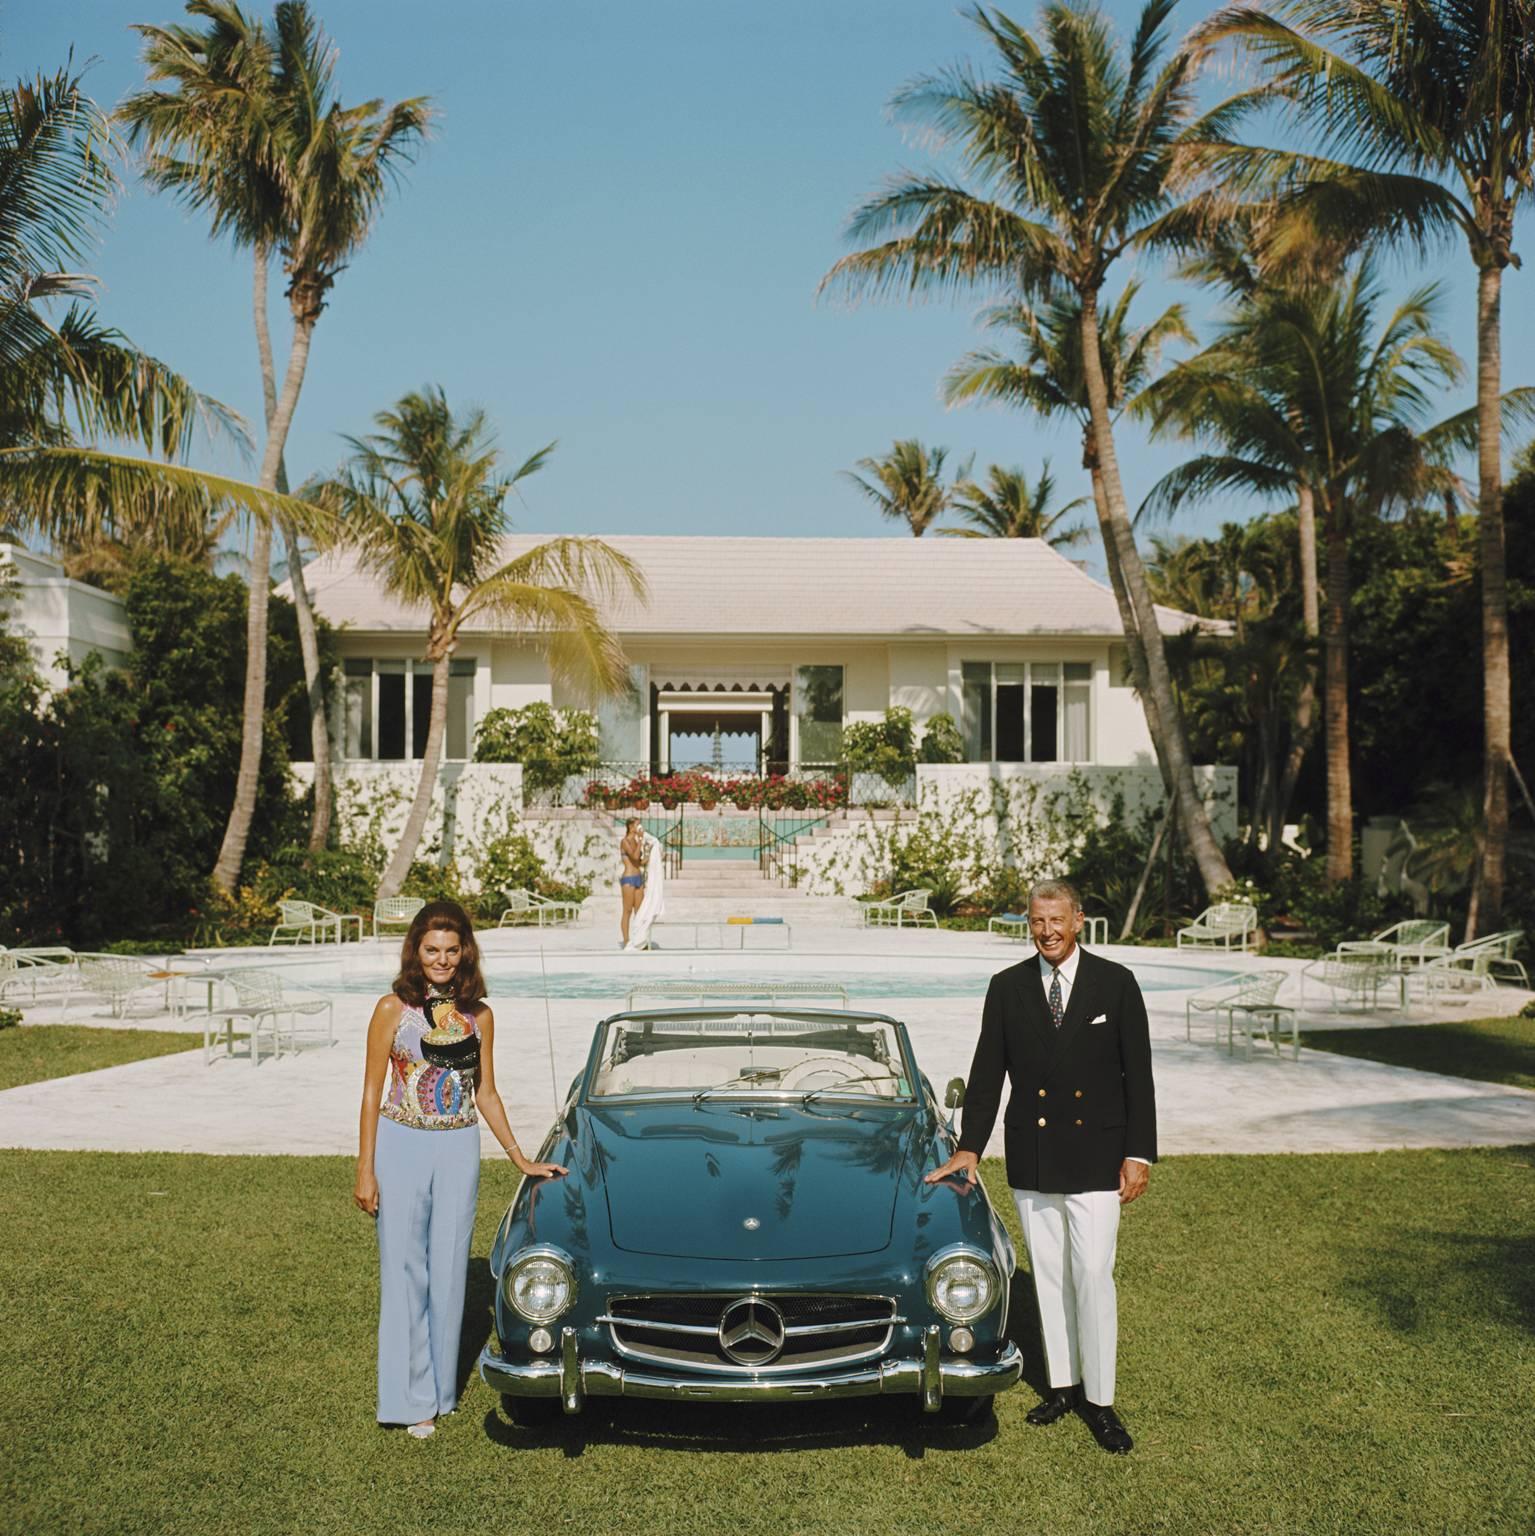 Slim Aarons Figurative Photograph - 'The Fullers' Palm Beach 1970  (Estate Stamped Edition)